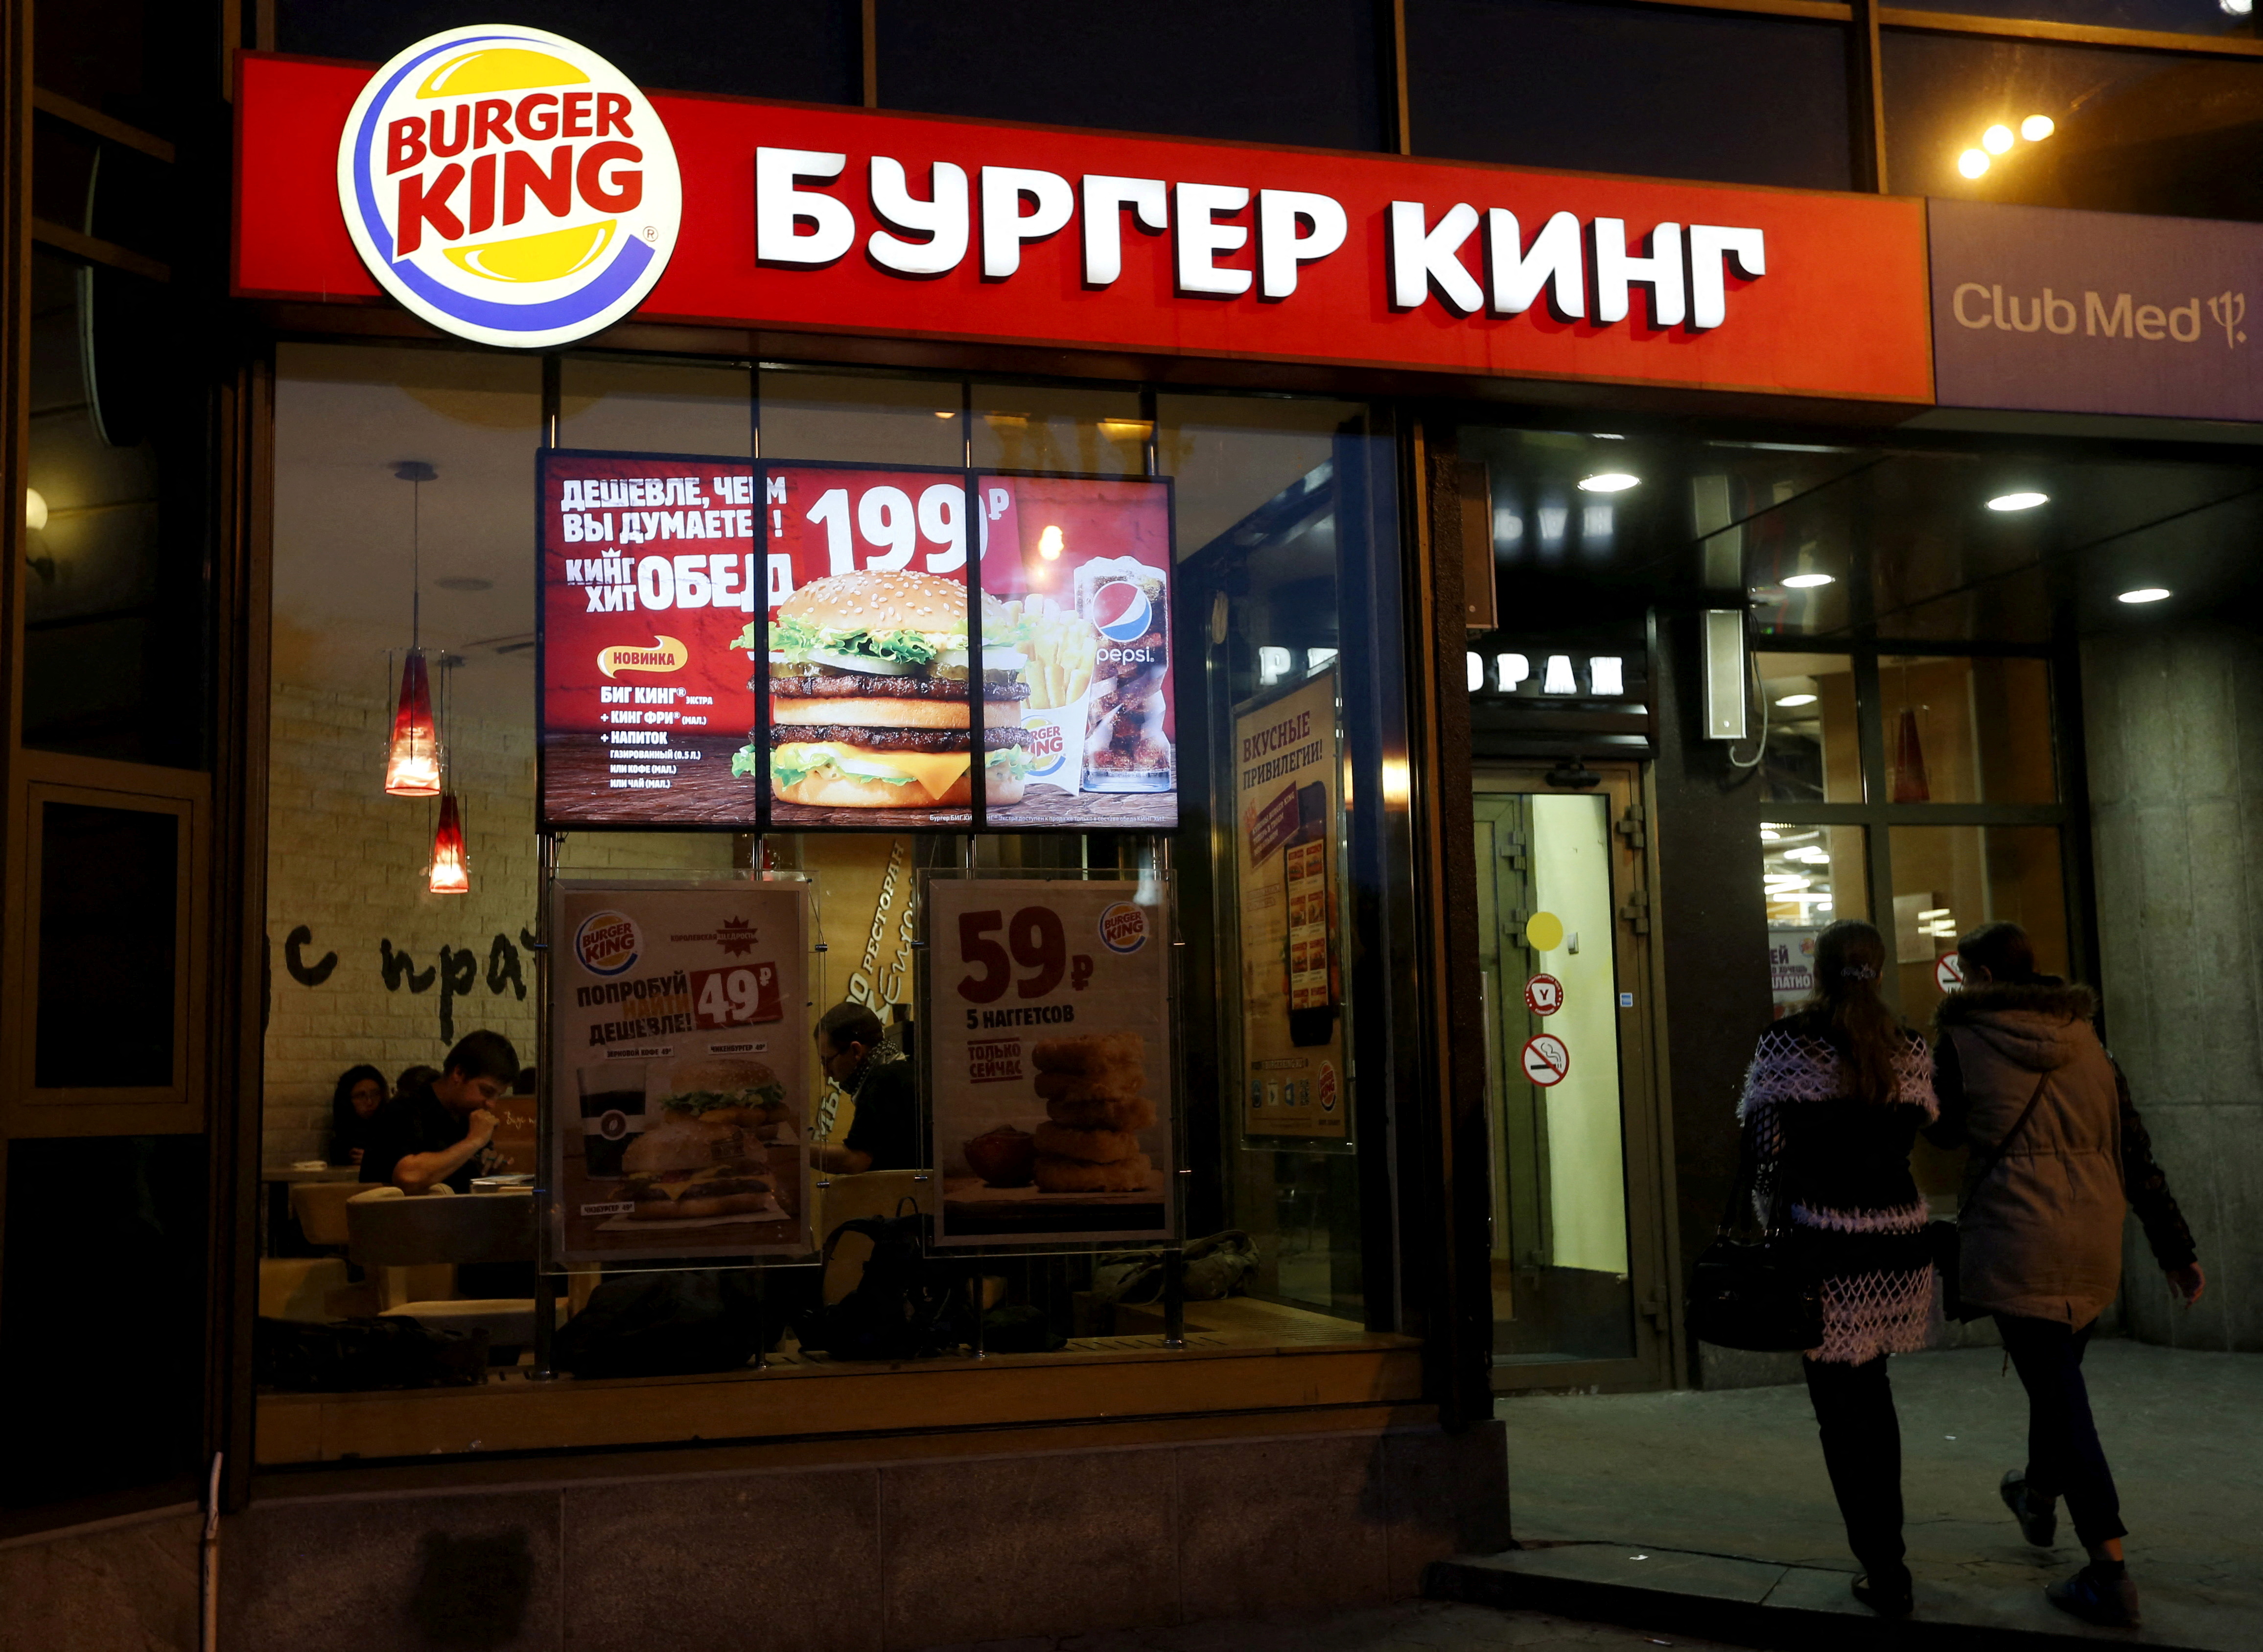 Burger King Says Russia Franchisee ‘Refused’ to Close Restaurants